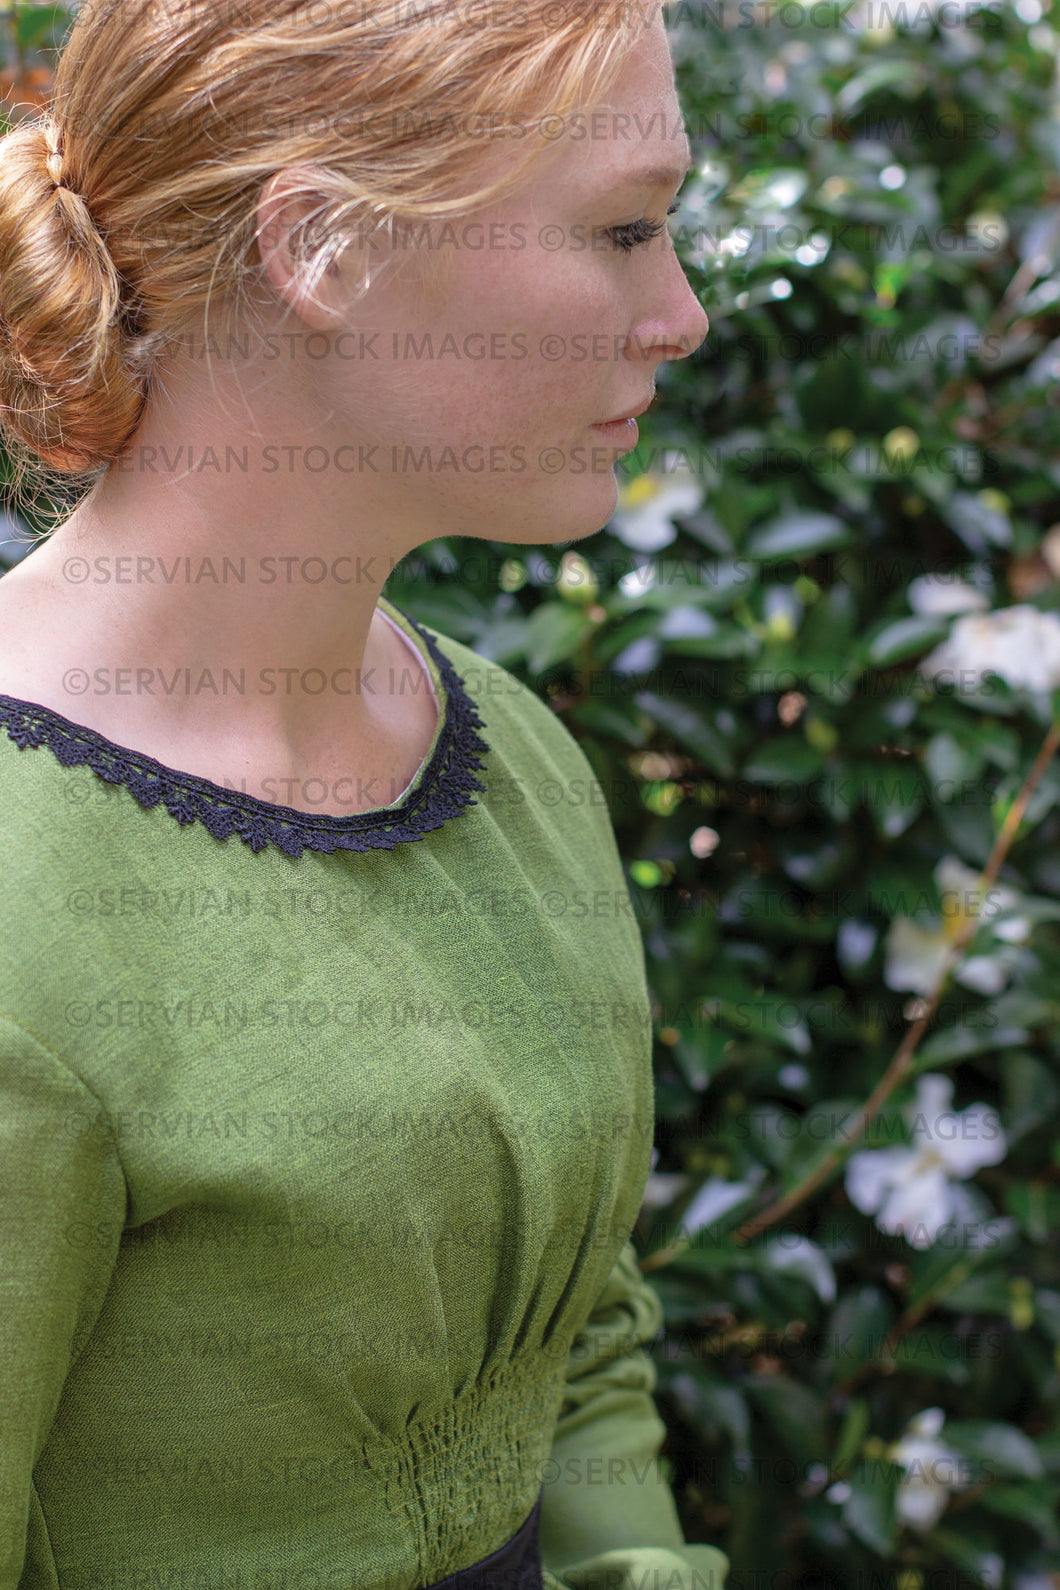 Victorian woman in a green gather front bodice and skirt  (Lauren 0035)